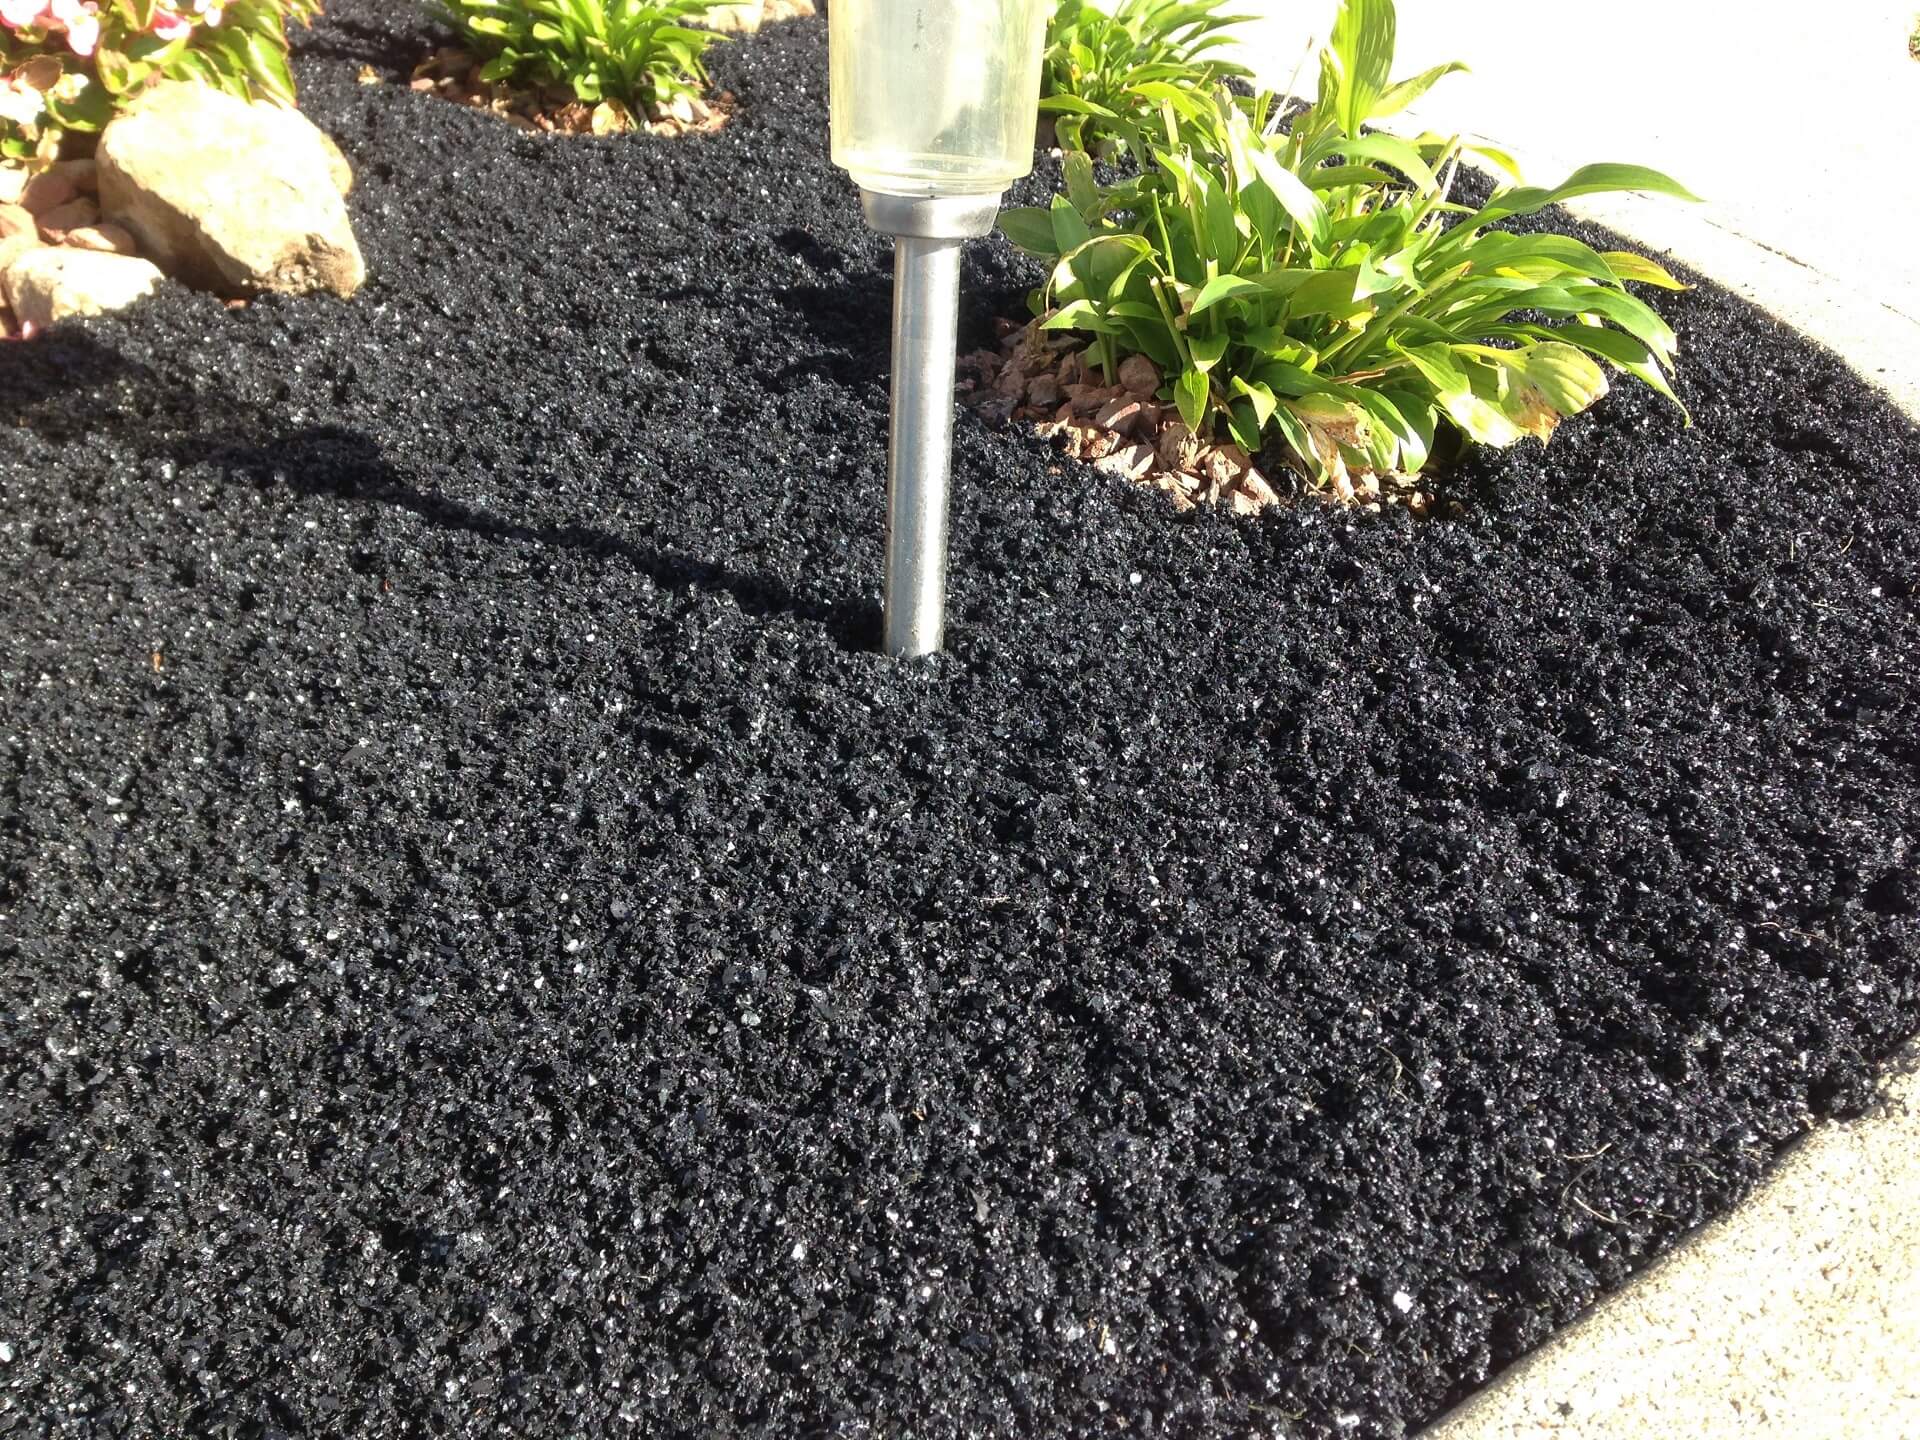 USA Safety Surfacing Experts-Bonded Rubber Mulch